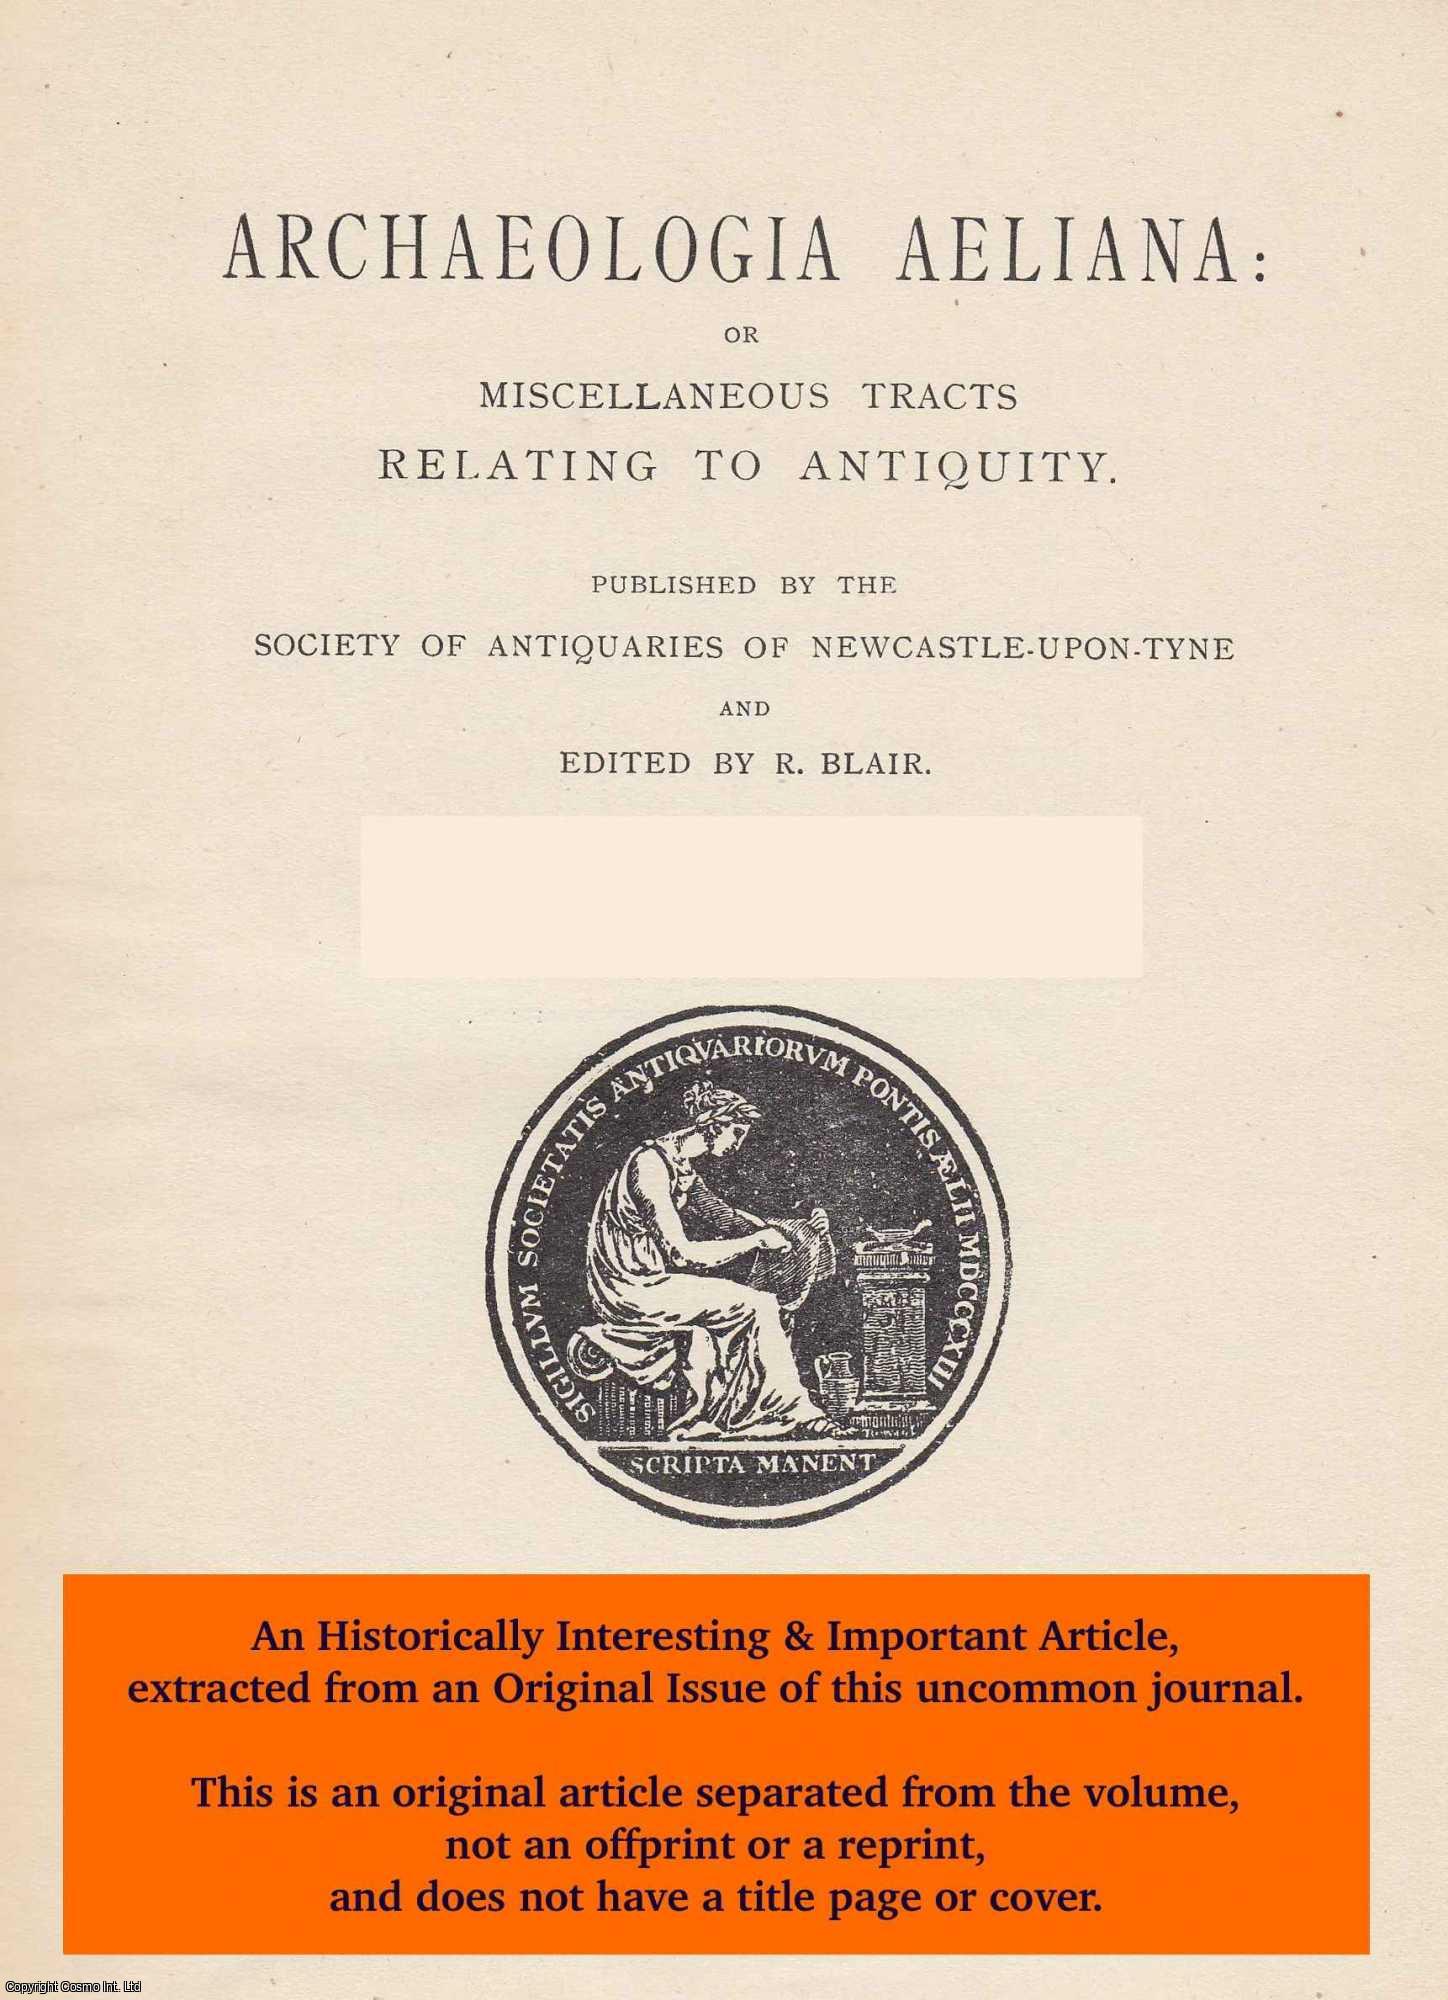 A.J. Lilburn - 1960. The Pipe Rolls of Edward I. Continued. An original article from The Archaeologia Aeliana: or Miscellaneous Tracts Relating to Antiquity, 1960.